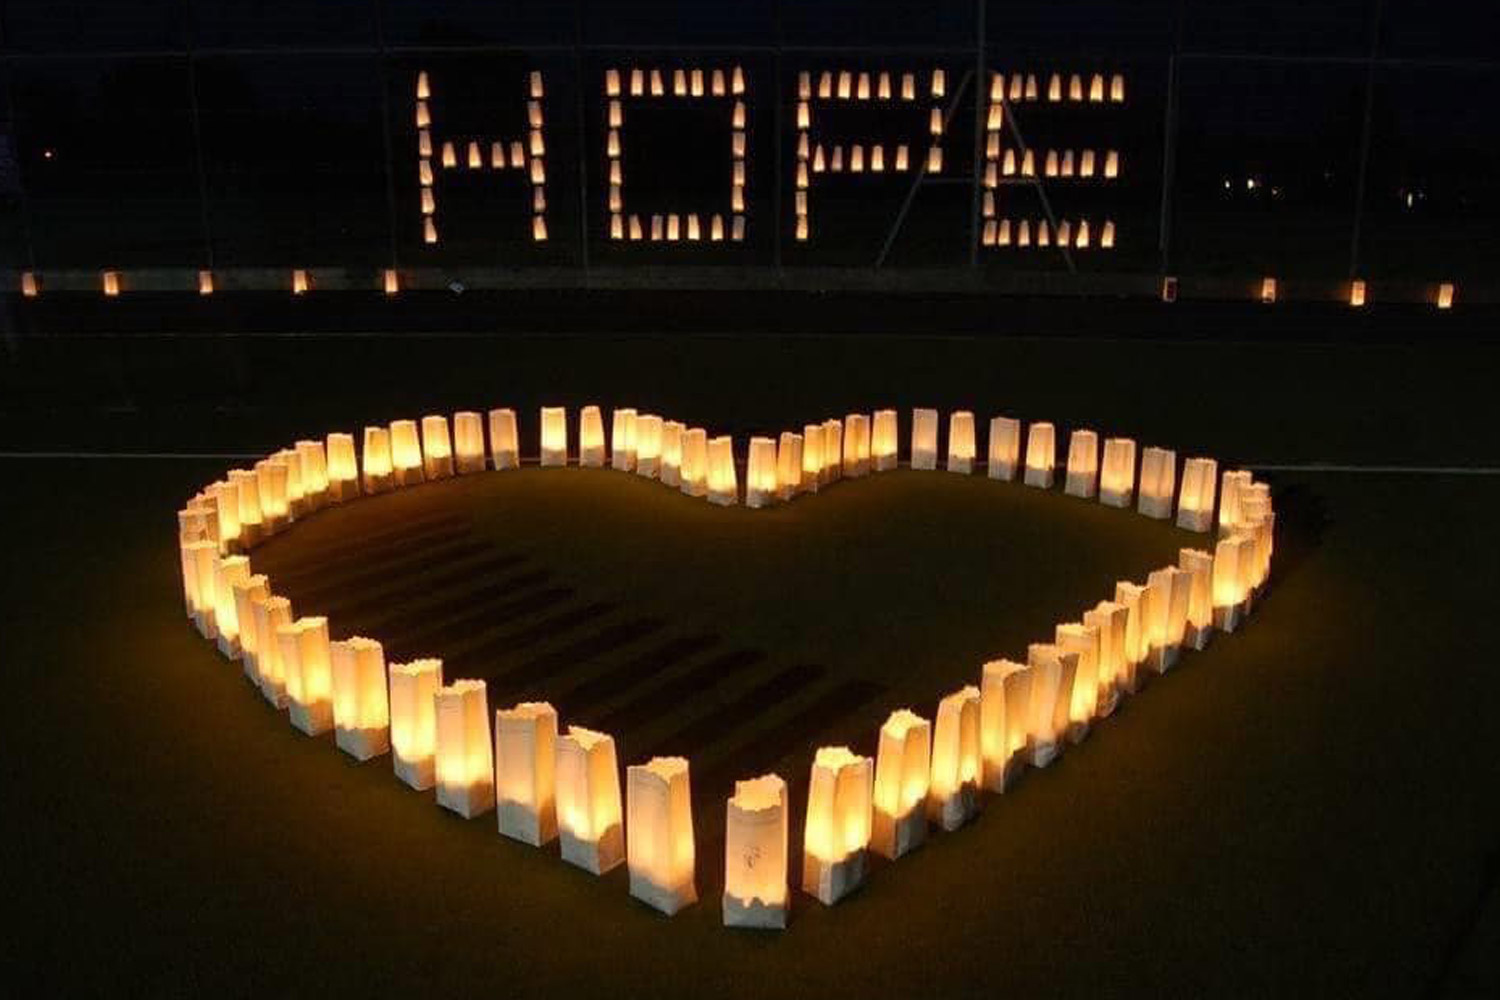 Glowing luminaries on the ground in the shape of a heart. Luminaries in the background spell out the word hope.